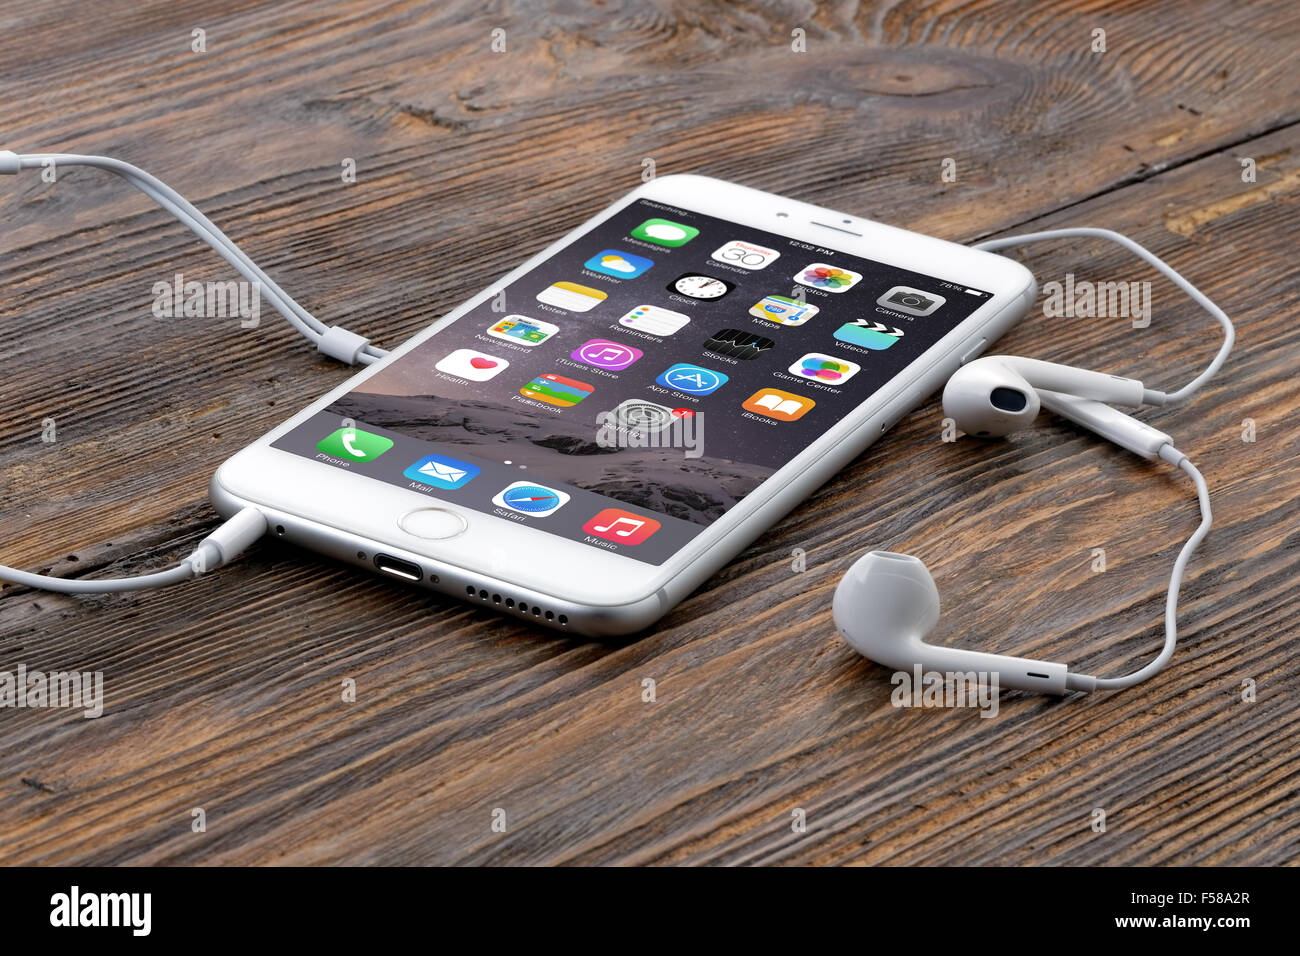 Silver iPhone 6 Plus on wooden table Stock Photo